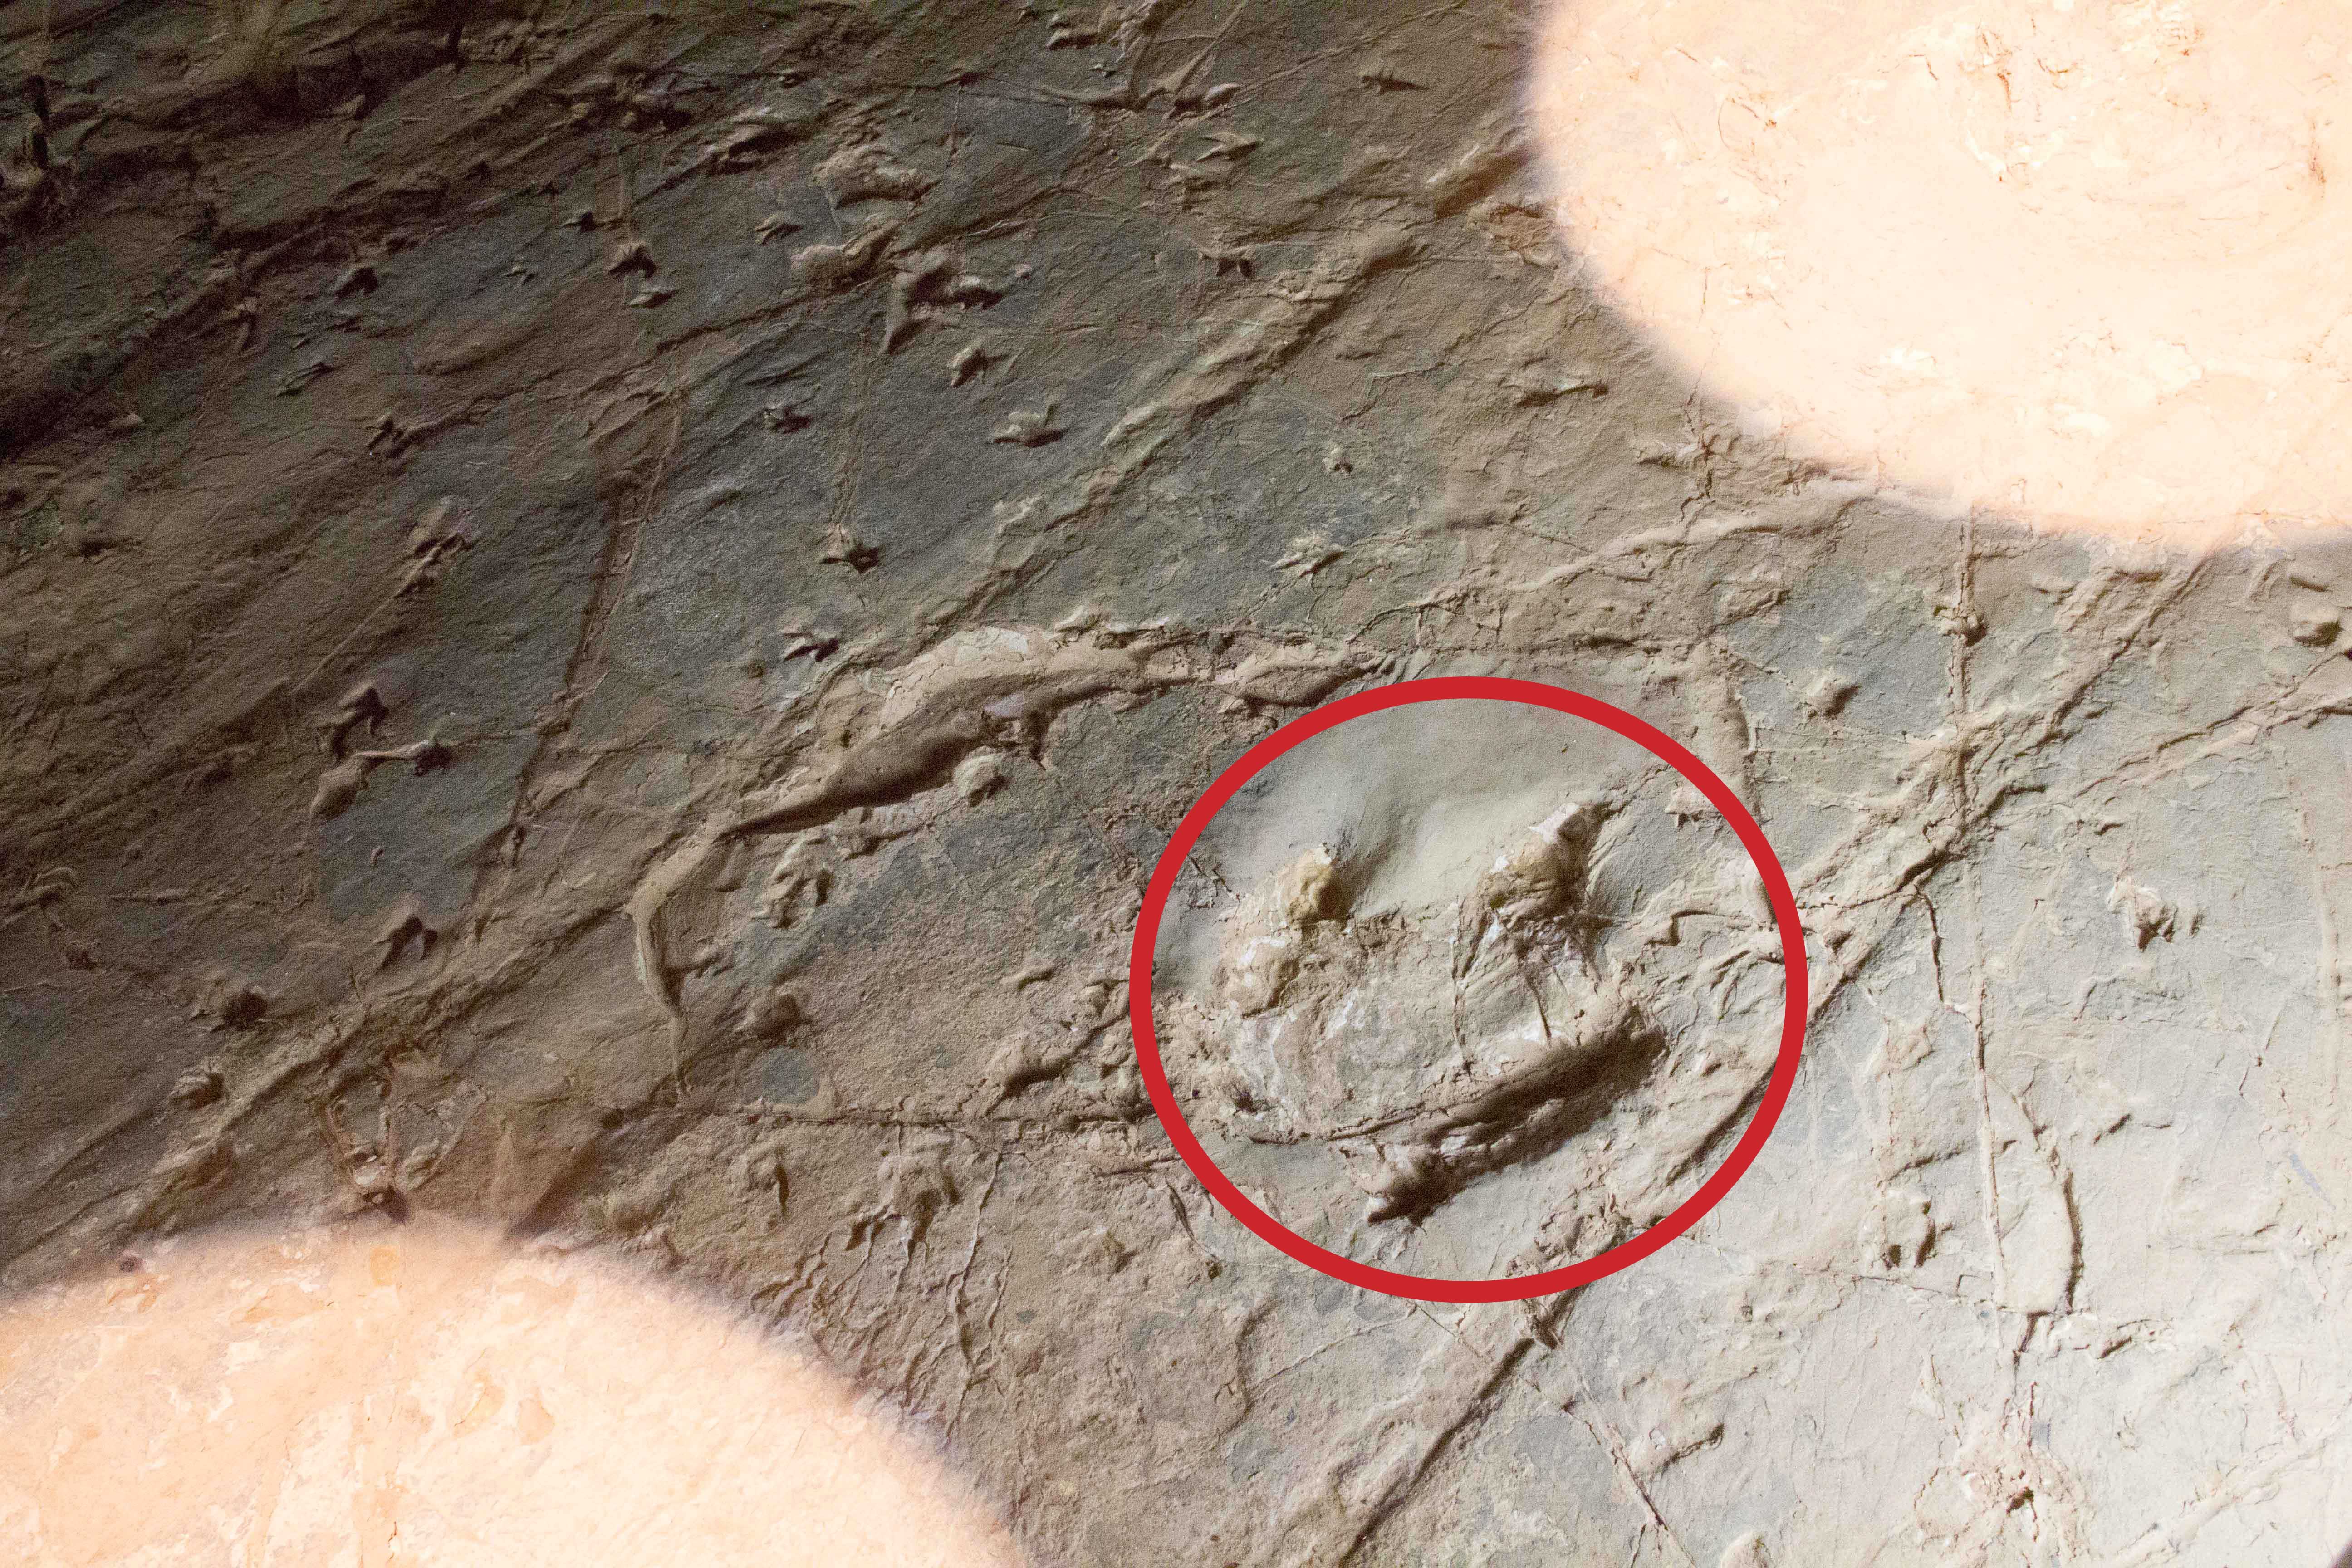 Red circle contains the three-toed print of the large theropod.